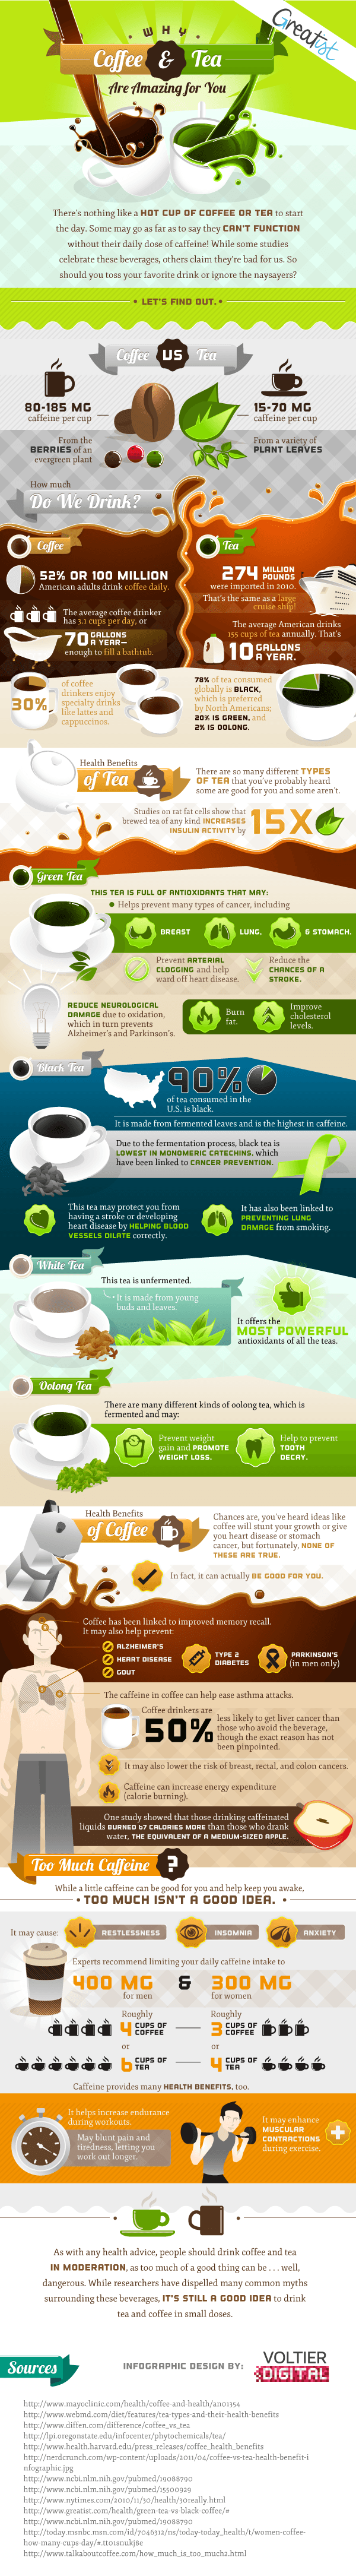 Why-Coffee-and-Tea-are-Amazing-for-You